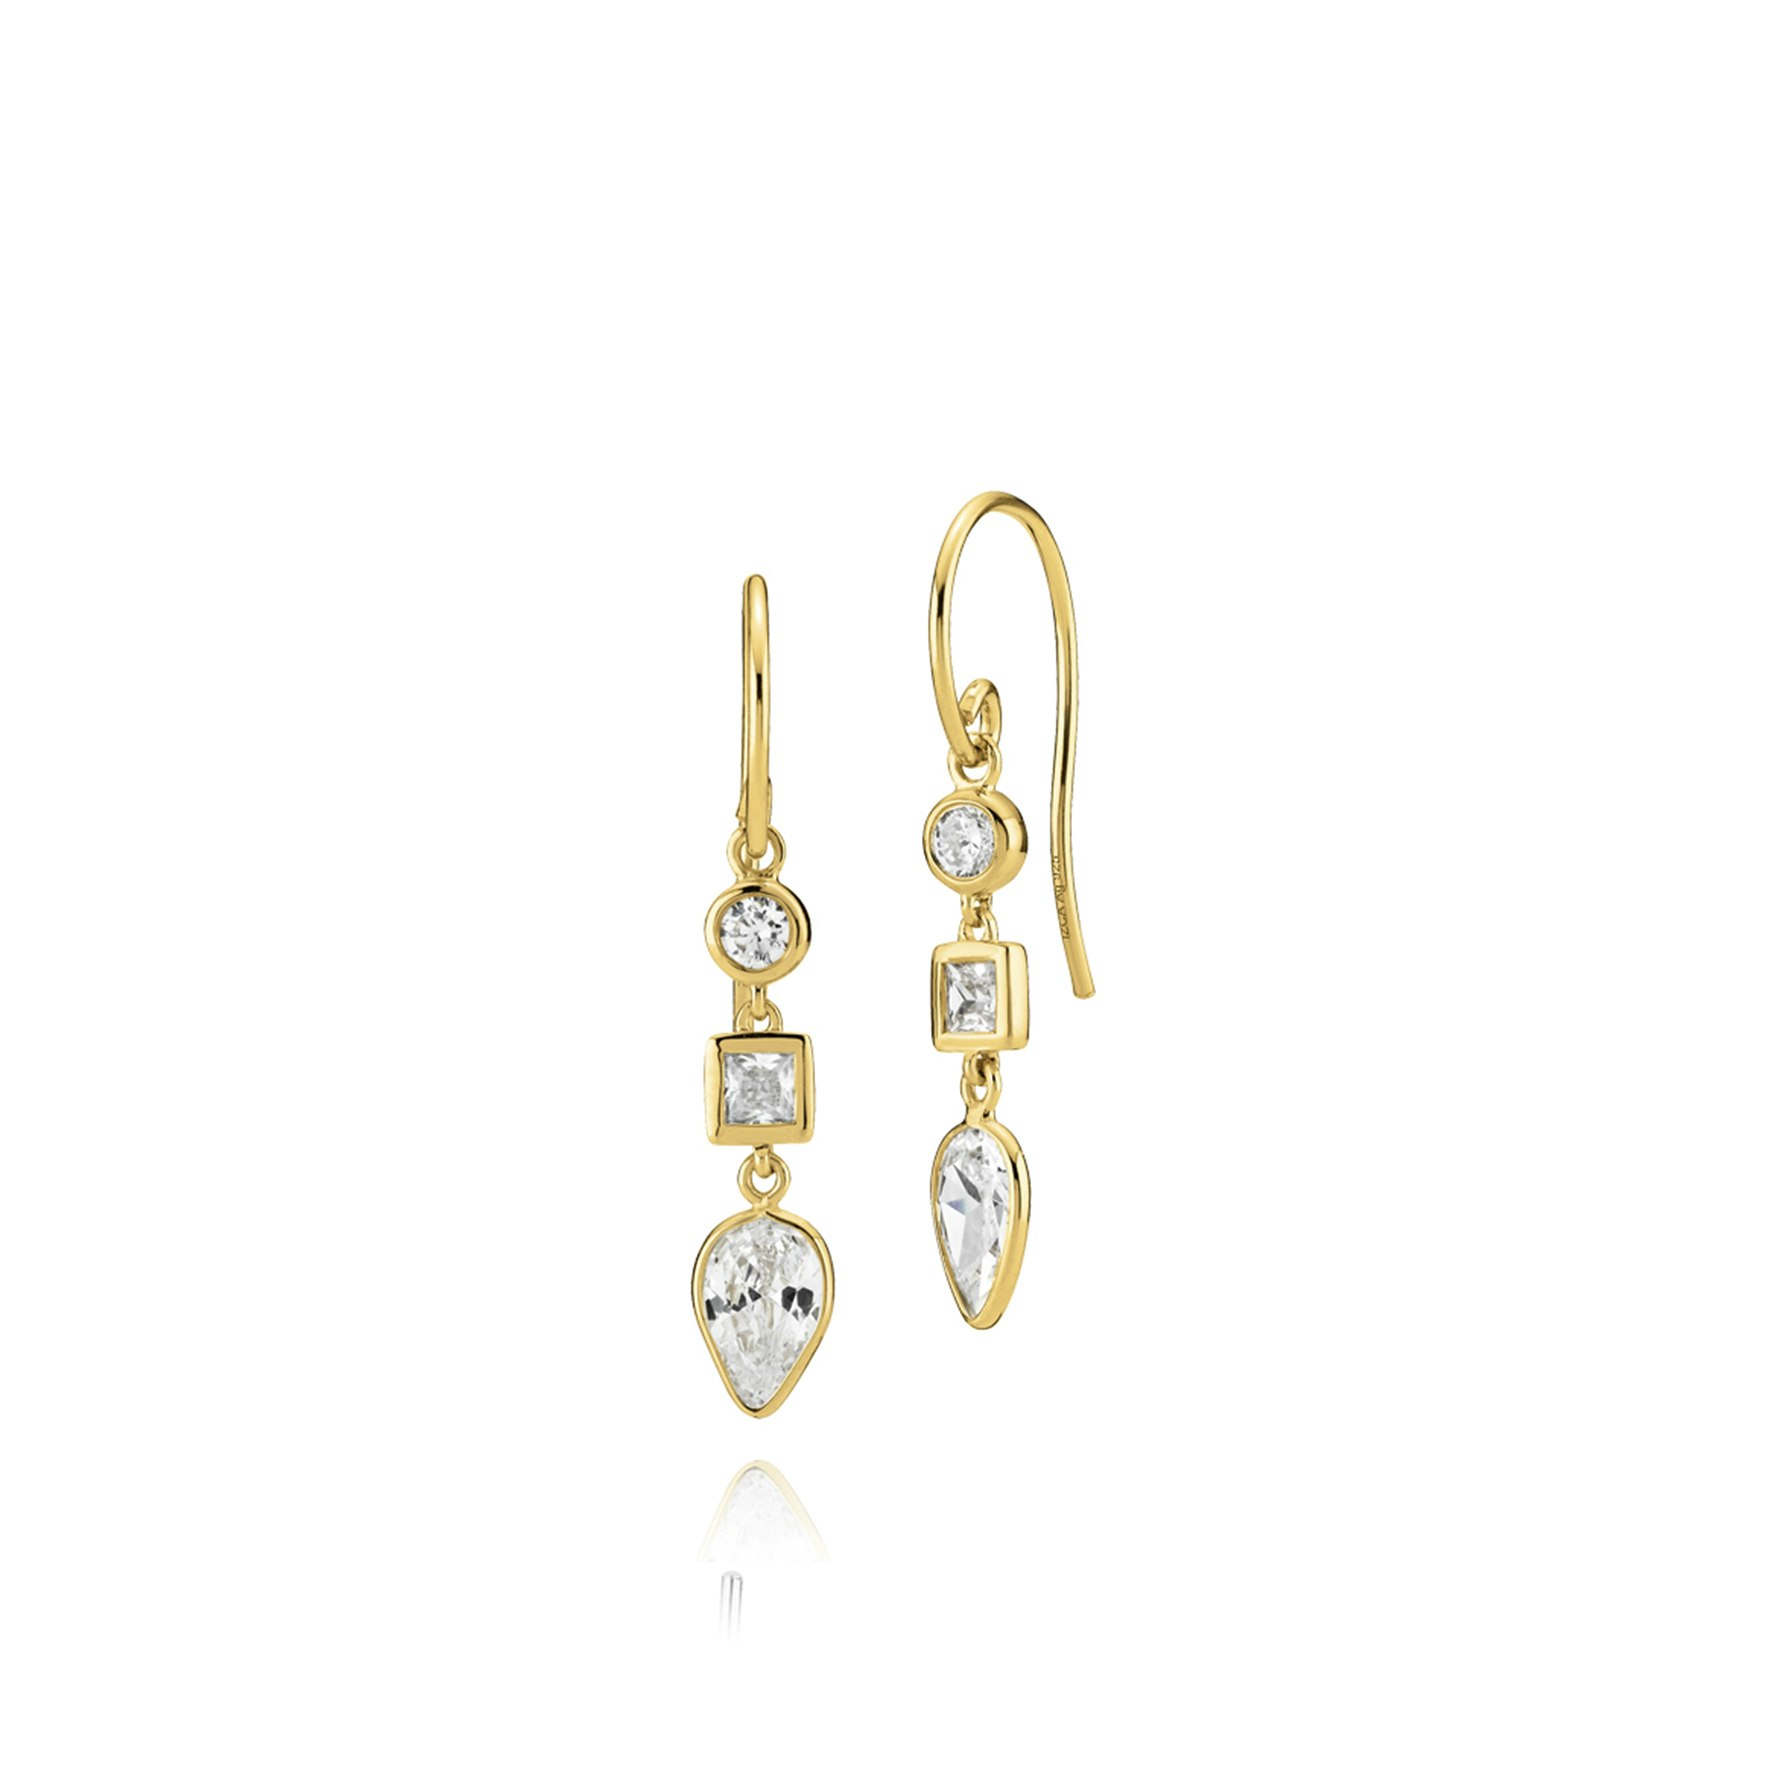 Aya Large Earrings from Izabel Camille in Goldplated Silver Sterling 925